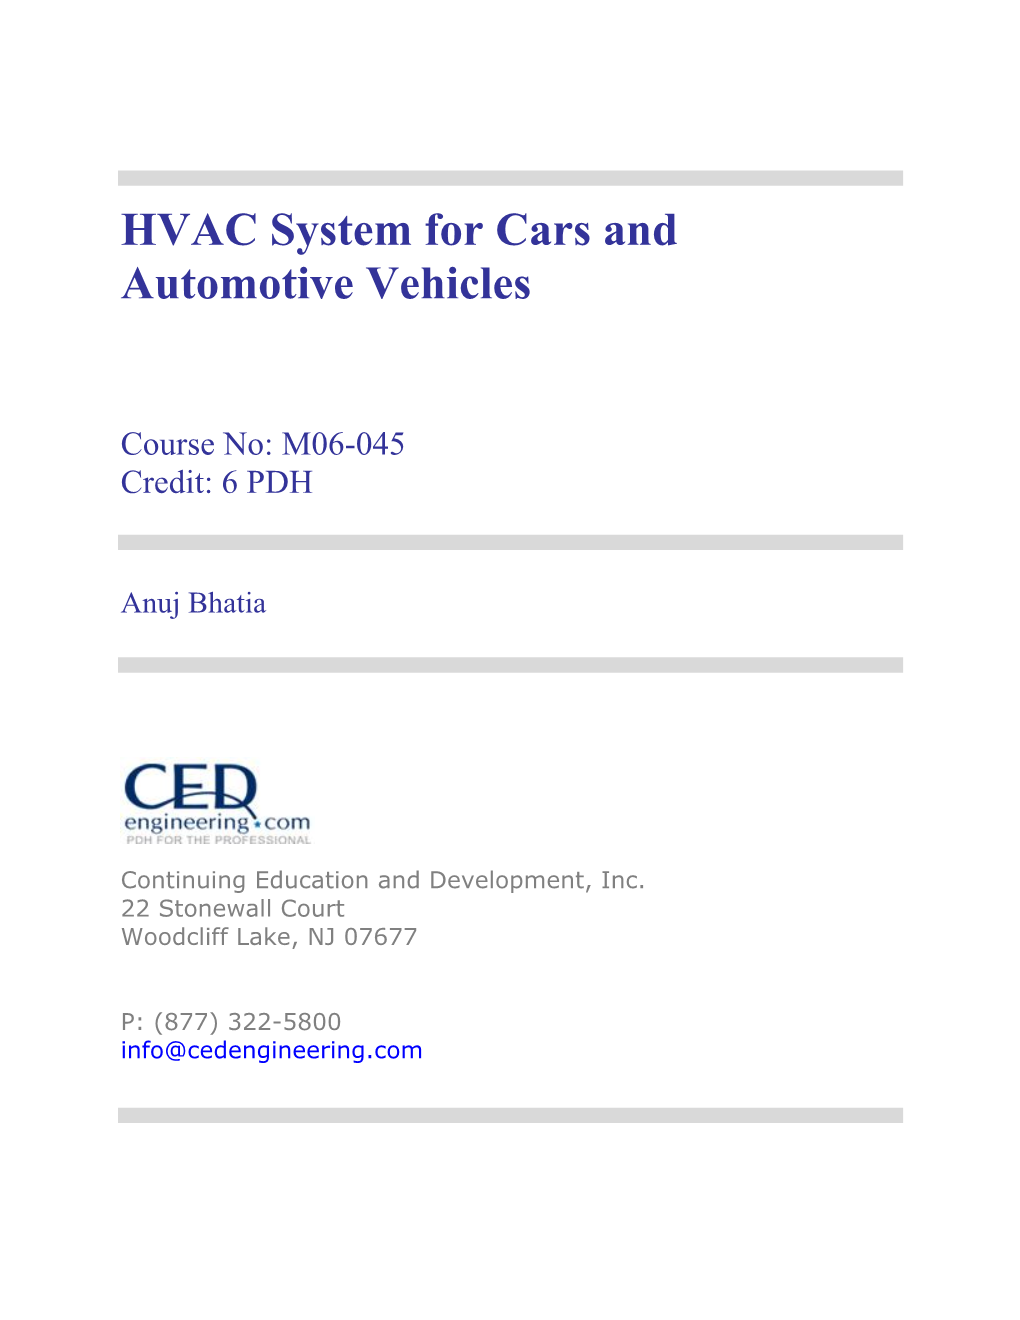 HVAC System for Cars and Automotive Vehicles